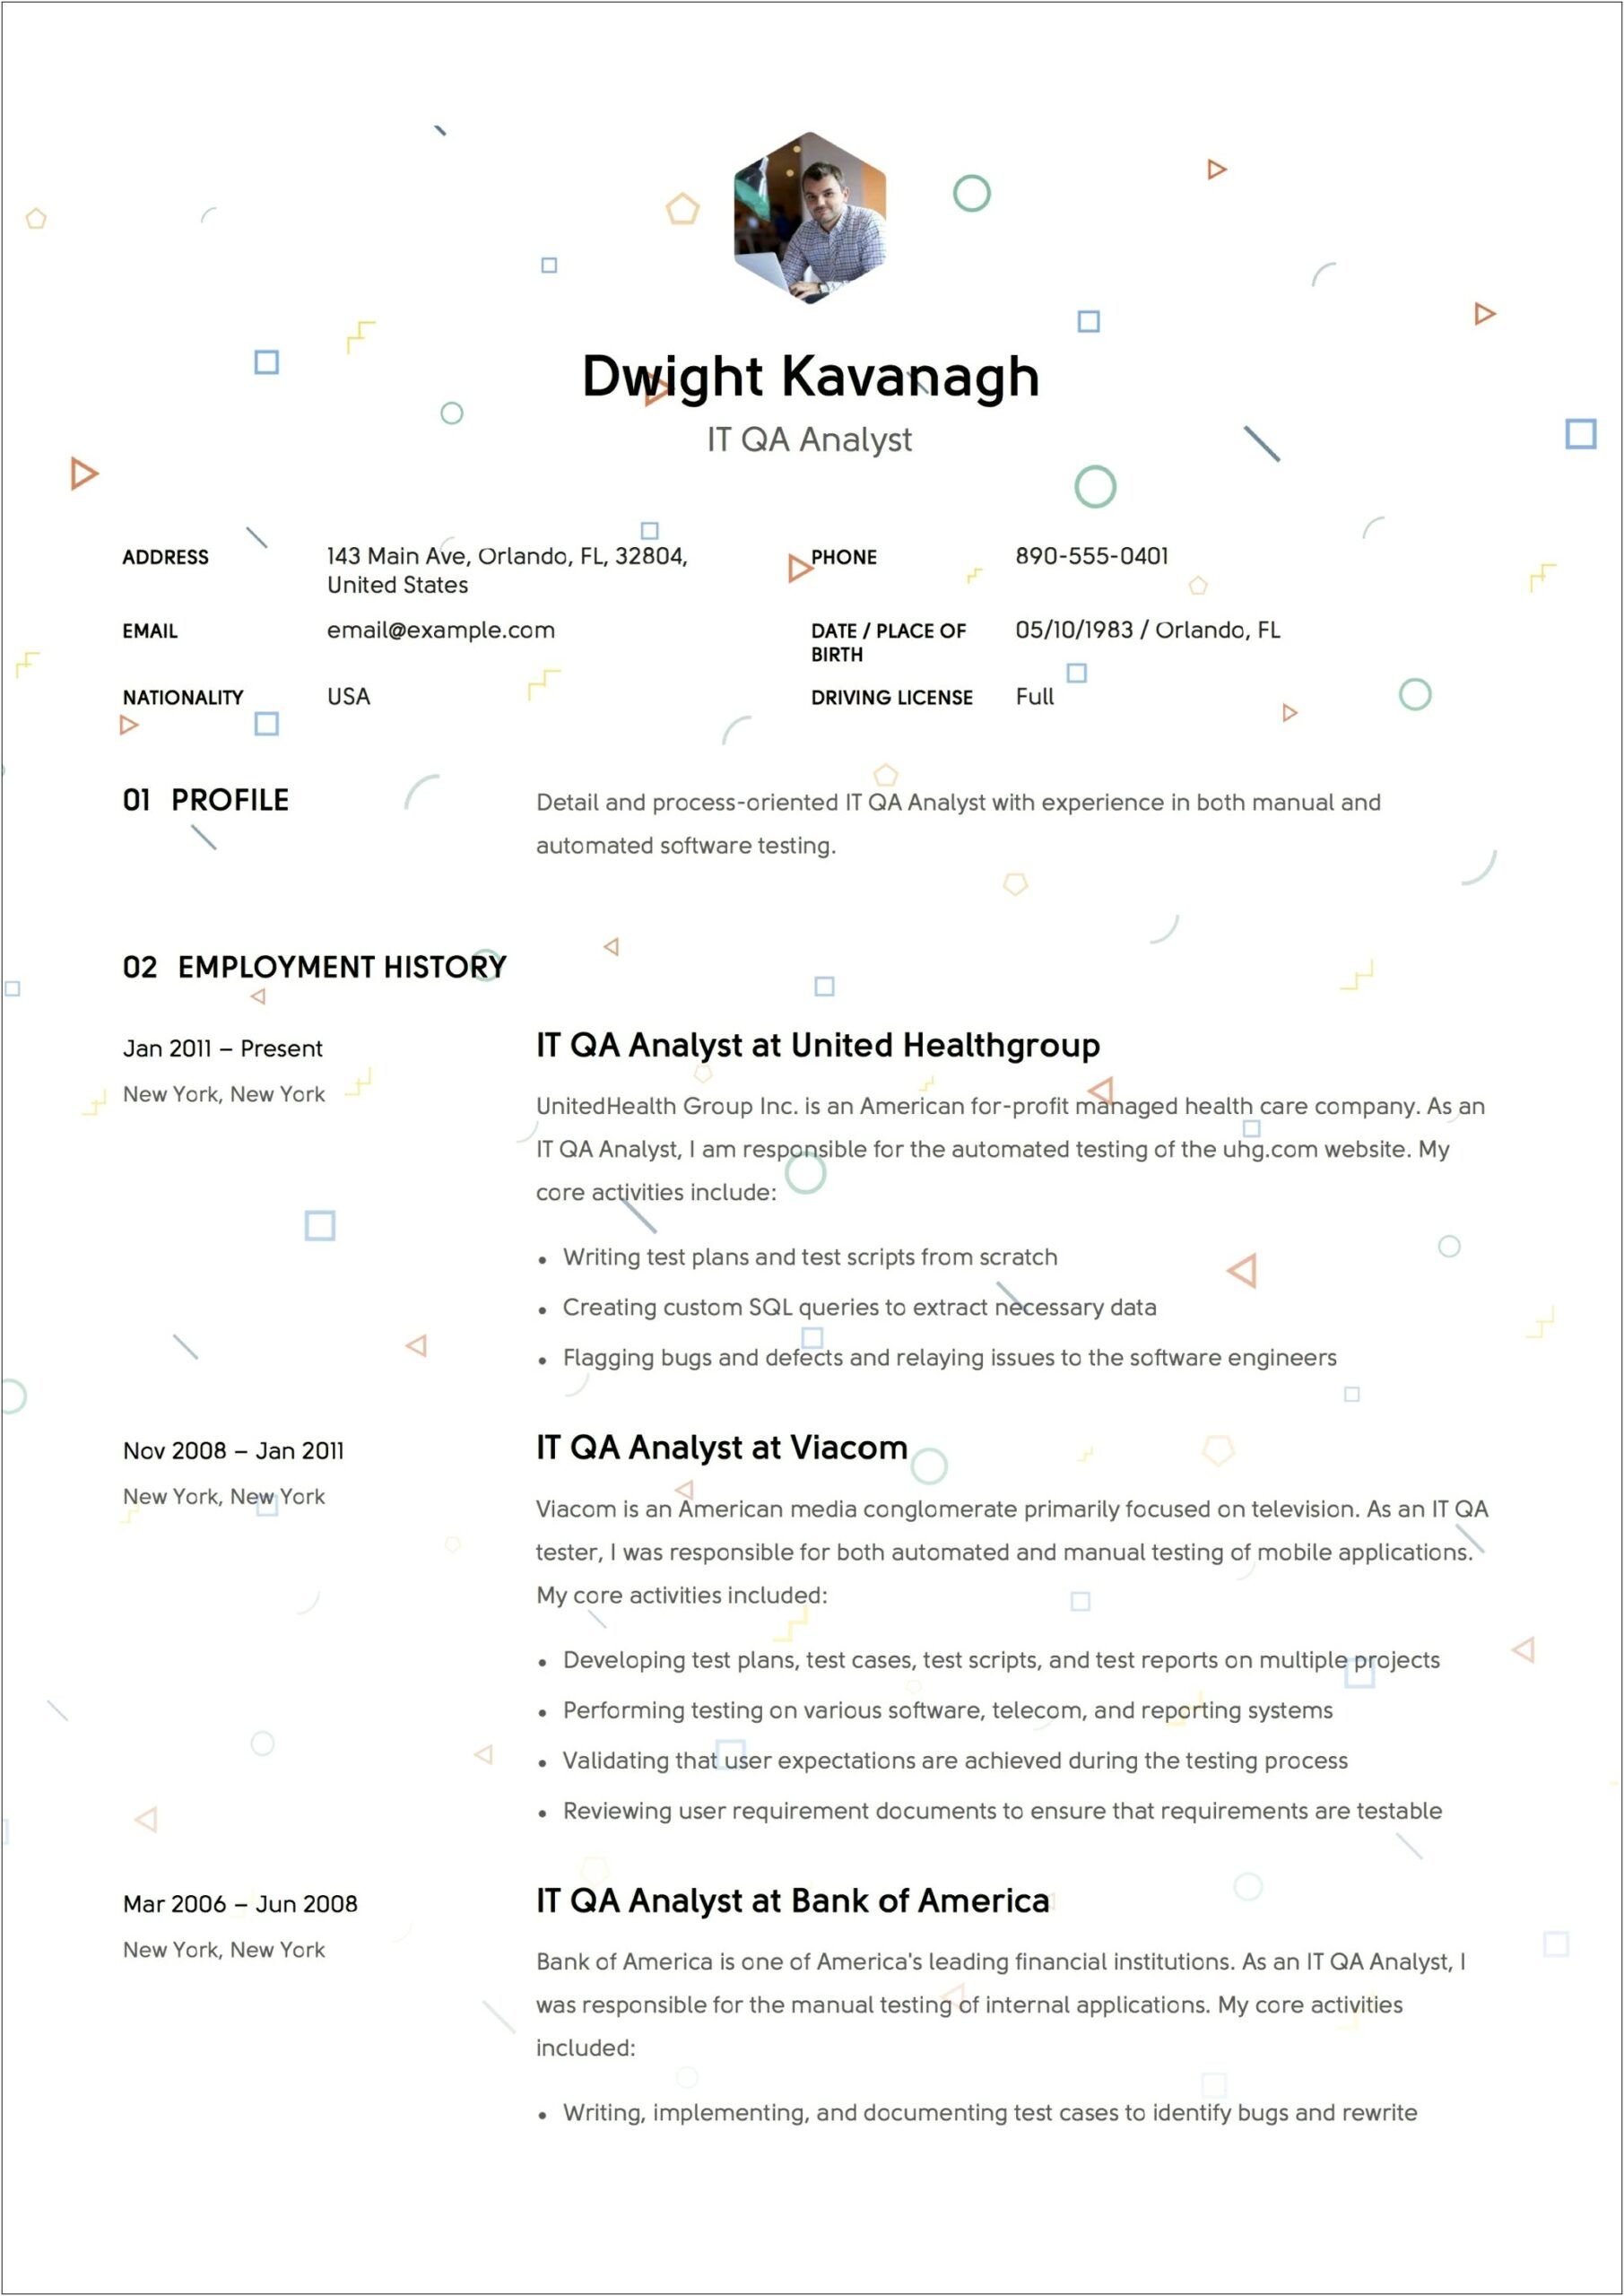 Manual Testing Resume For 4 Years Experience Pdf